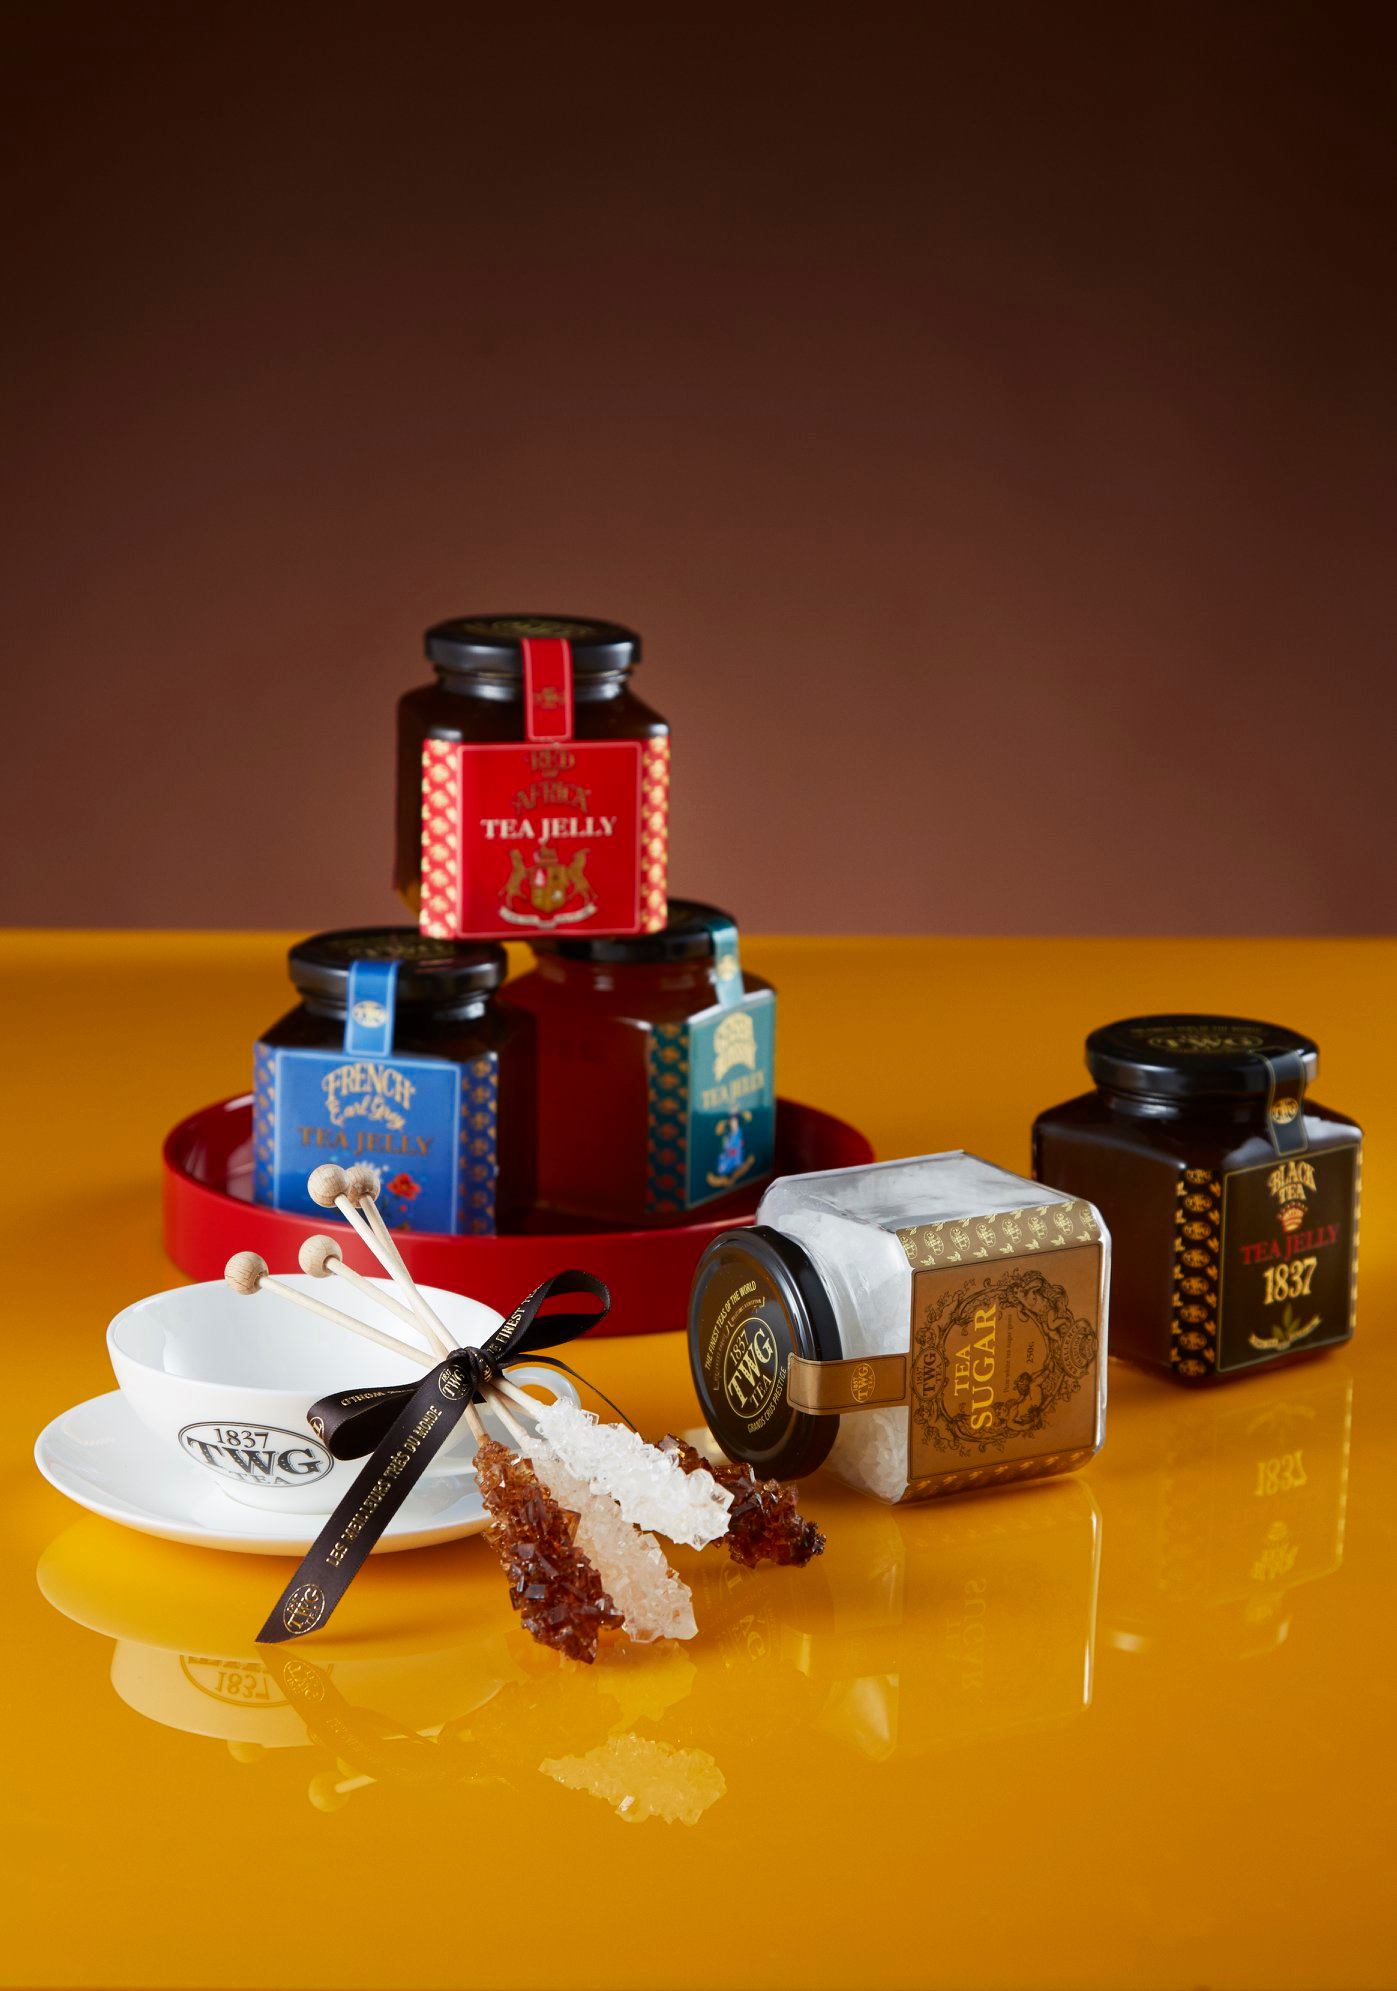 Get the best of every flavour and customize your Mini Tea Jelly Gift Sets in boxes of 2 or 4 on TWGTea.com. Now available in 80ml.